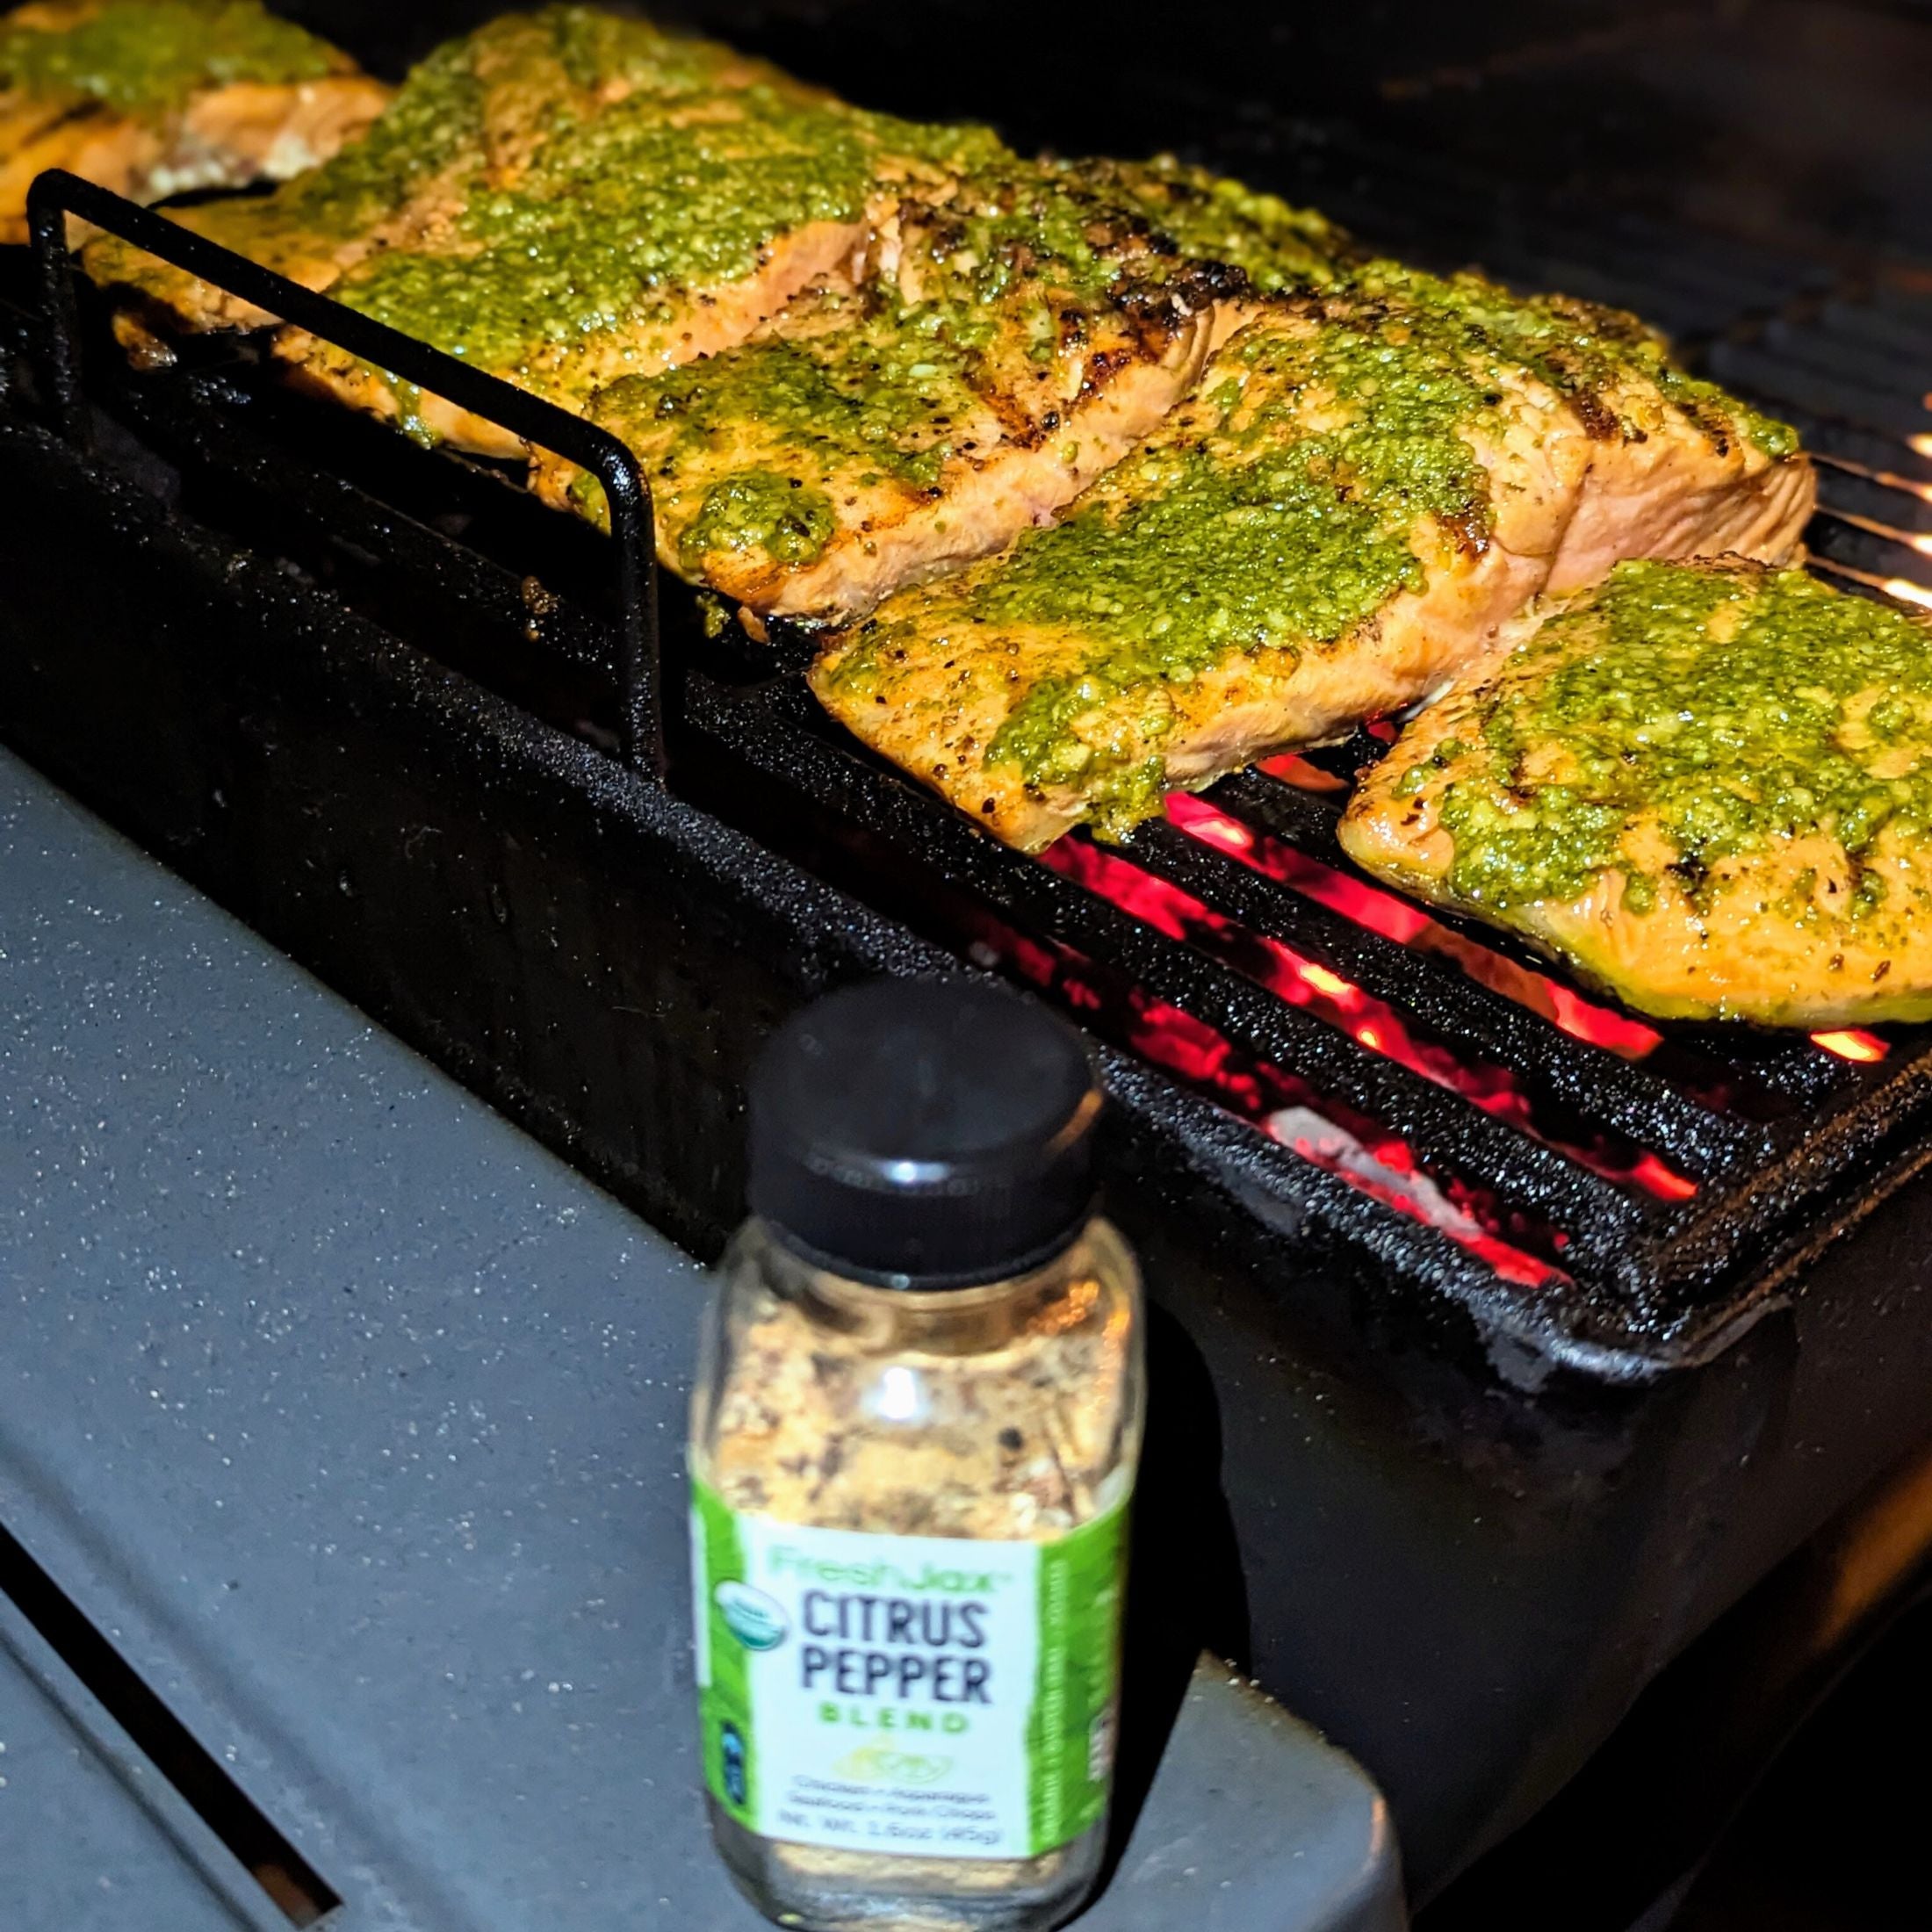 Salmon on the grill with pesto and Citrus Pepper Seasoning